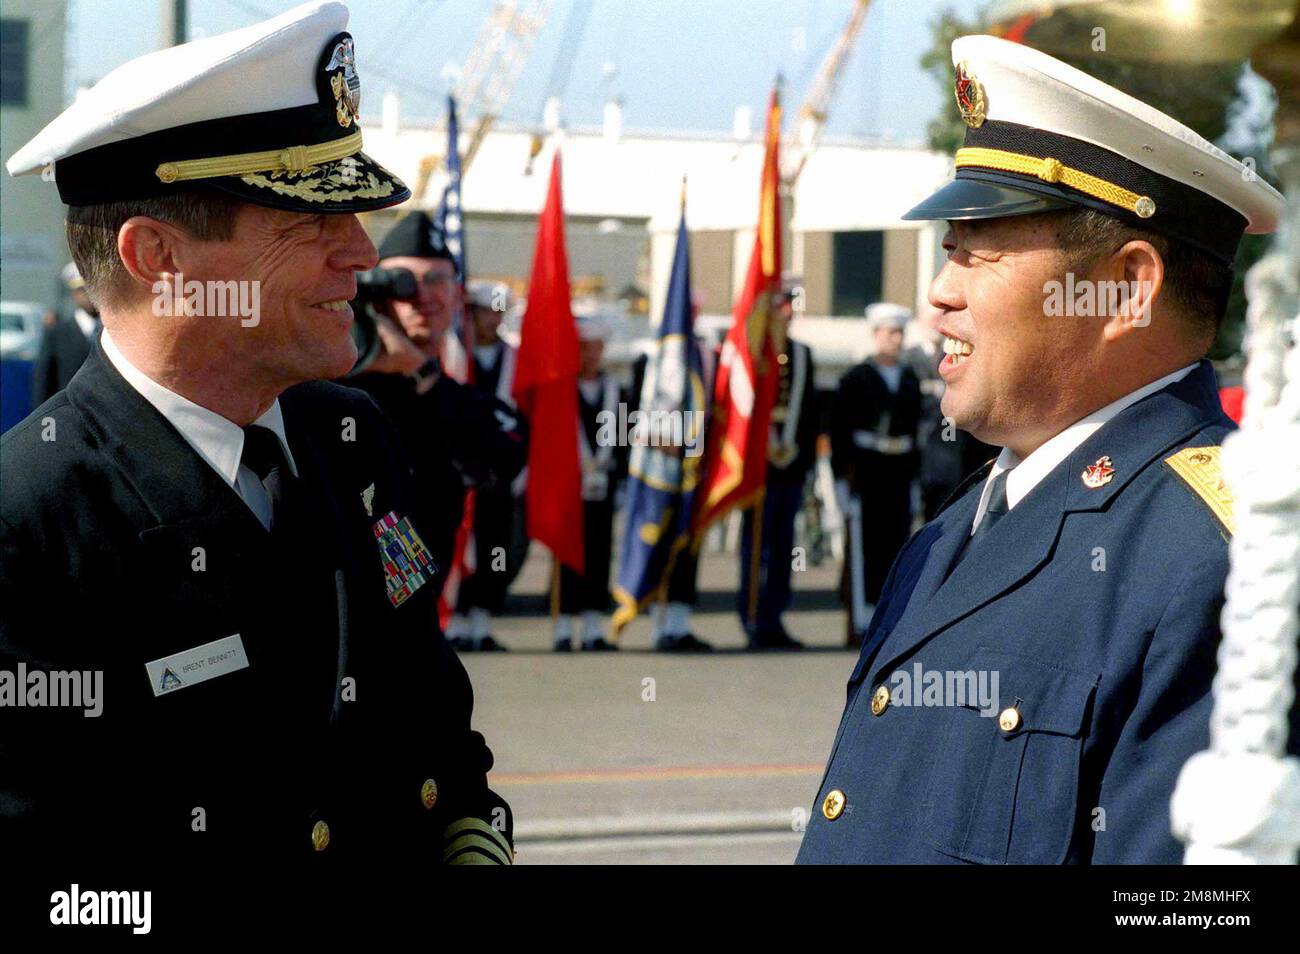 US Navy Vice Admiral Brent Bennitt (Left), Commander Naval Air Forces Pacific, and Chinese Vice Admiral Wang (Right), Commander of the Chinese South Sea Fleet, exchange goodbyes on the pier at Naval Station North Island, San Diego, California. This marks the first time Chinese warships have crossed the Pacific and visited the Continental United States. The Luhu Class Destroyer HARIBING (DDG 112), Luda II Class Destroyer, ZHUHAI (DDG 166), and a supply ship, the Fusu Class, NANYUN (AOR/AK 953) (Chinese vessels not shown), stopped at Naval Station, North Island, San Diego, California. The next p Stock Photo